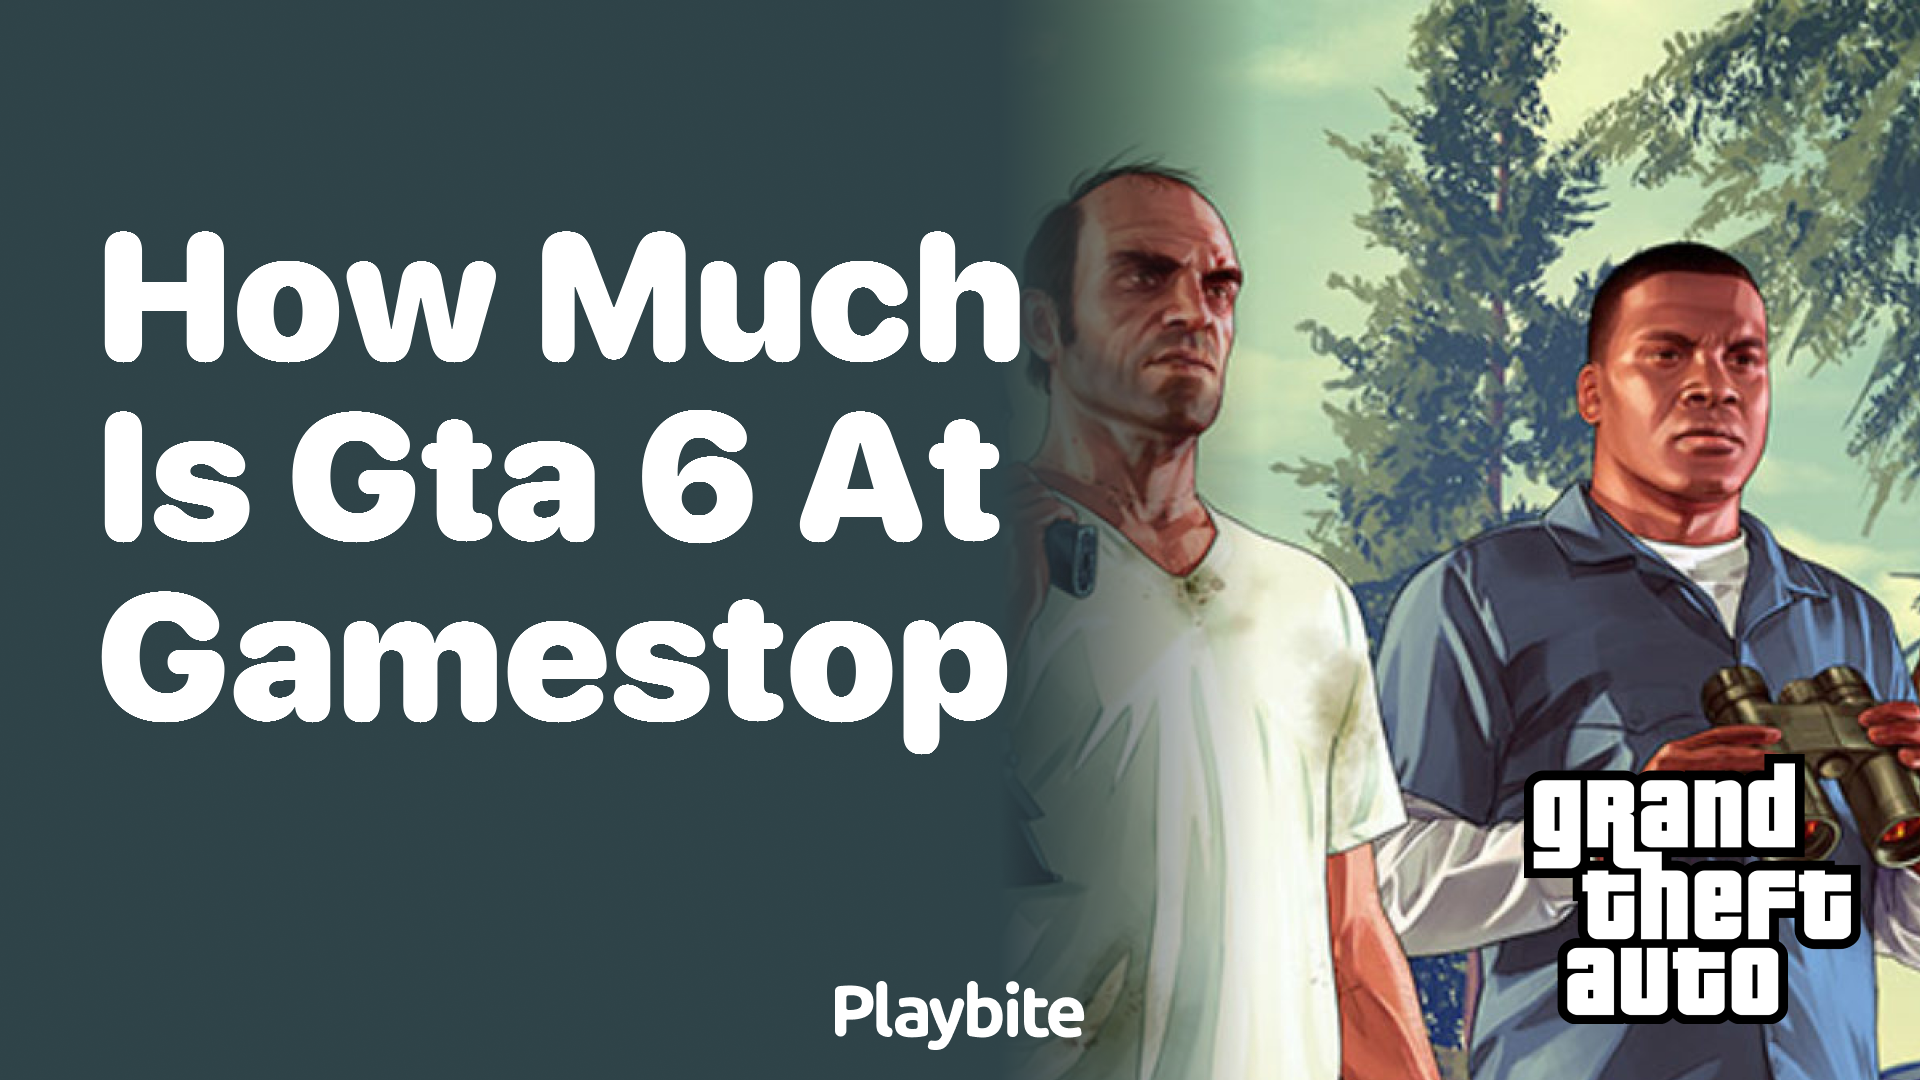 How much is GTA 6 at GameStop?